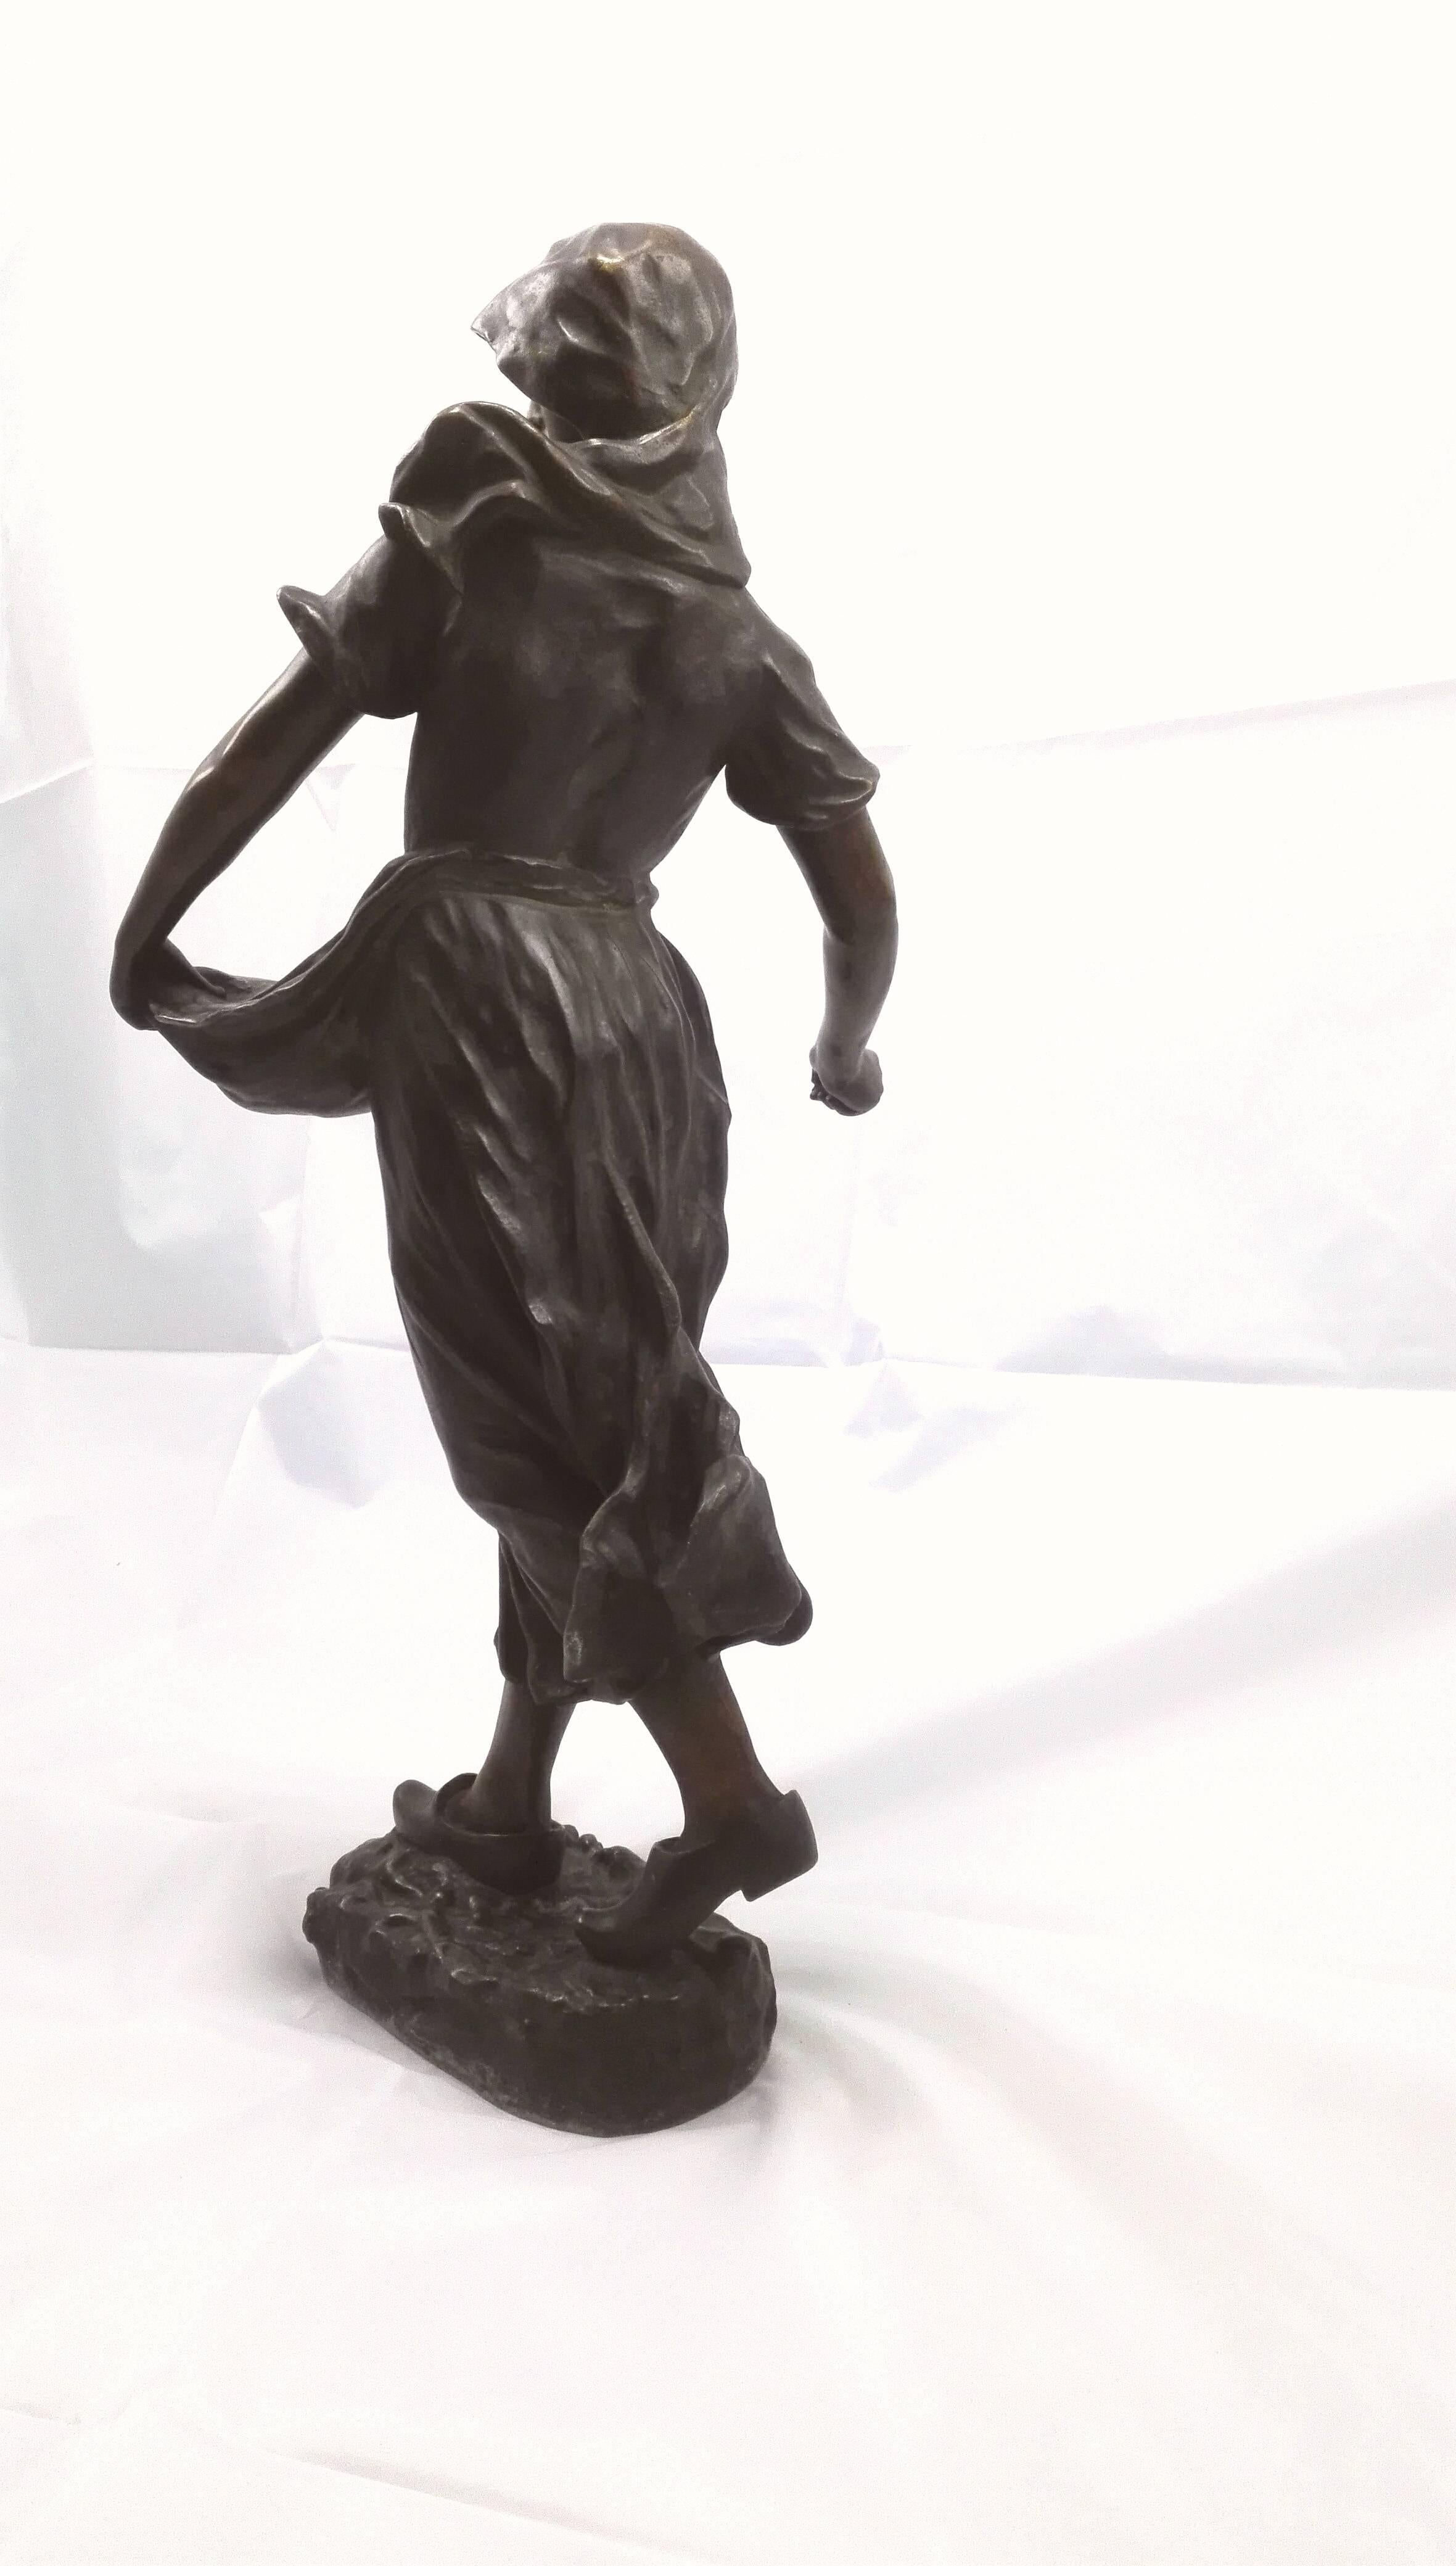 Born in Vienna/Austria, 1849. Bronze patinated. Dynamic depiction of a Dutch, young peasant woman in a vaden long dress and wooden slippers. Seeding the seed with the right hand, peppy and elegant! Holding the sapron with the seed in the left hand.